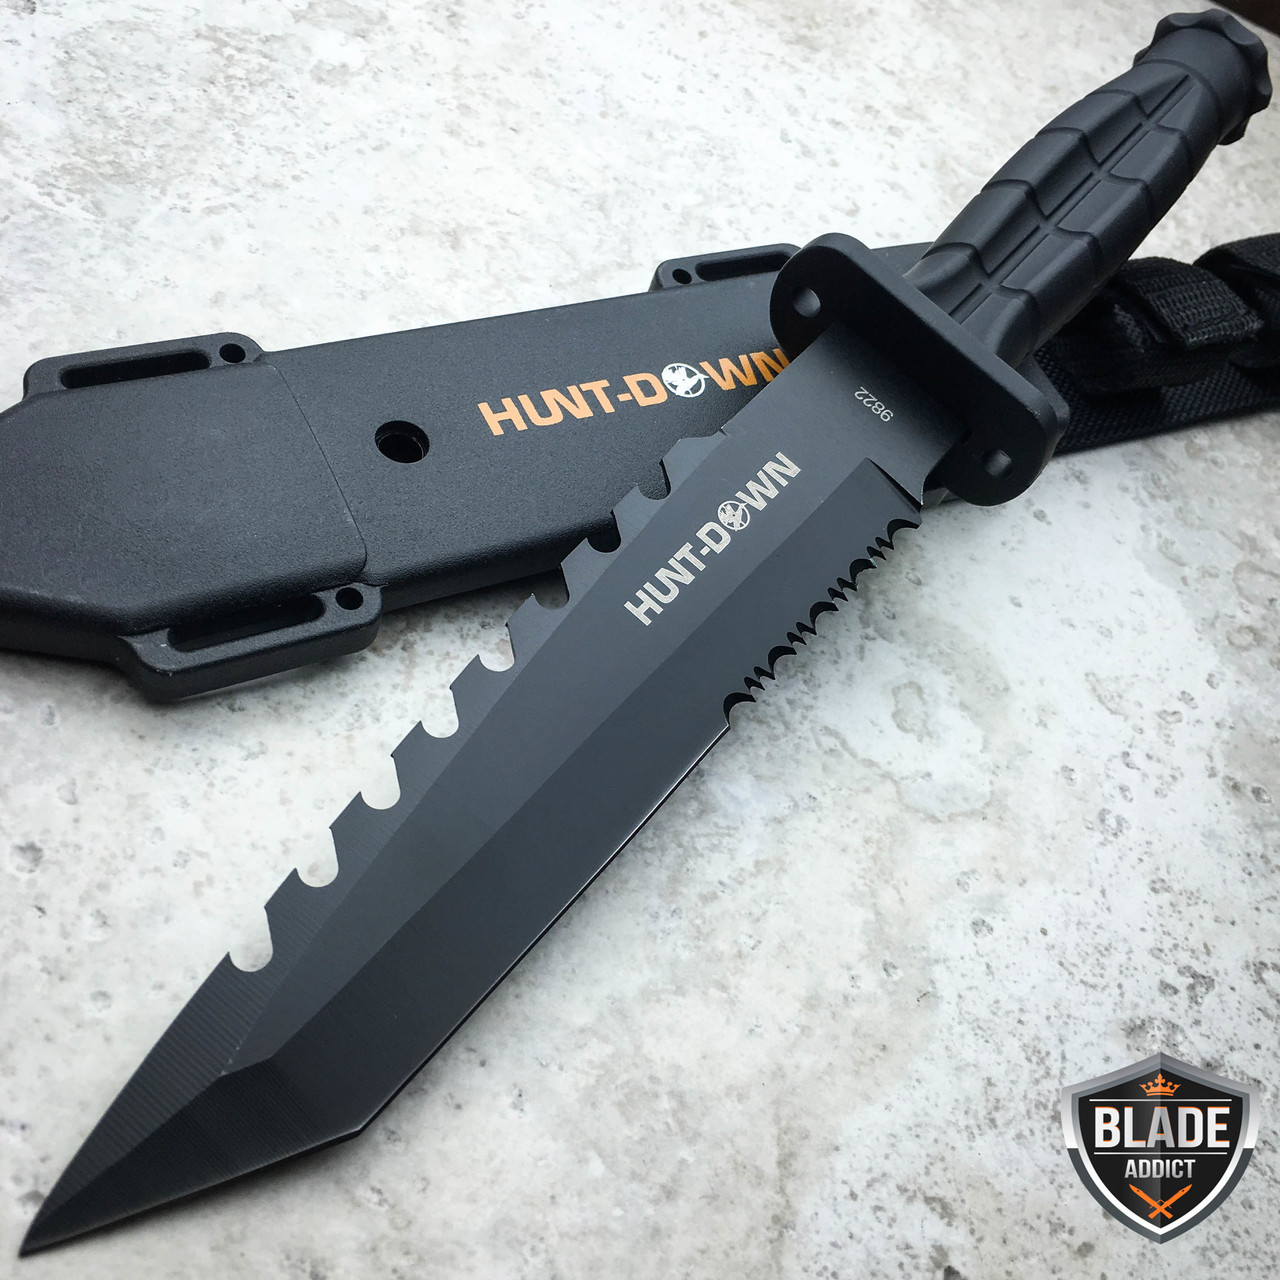 10.5 TACTICAL COMBAT BOWIE HUNTING KNIFE Survival Military Fighting Fixed  Blade